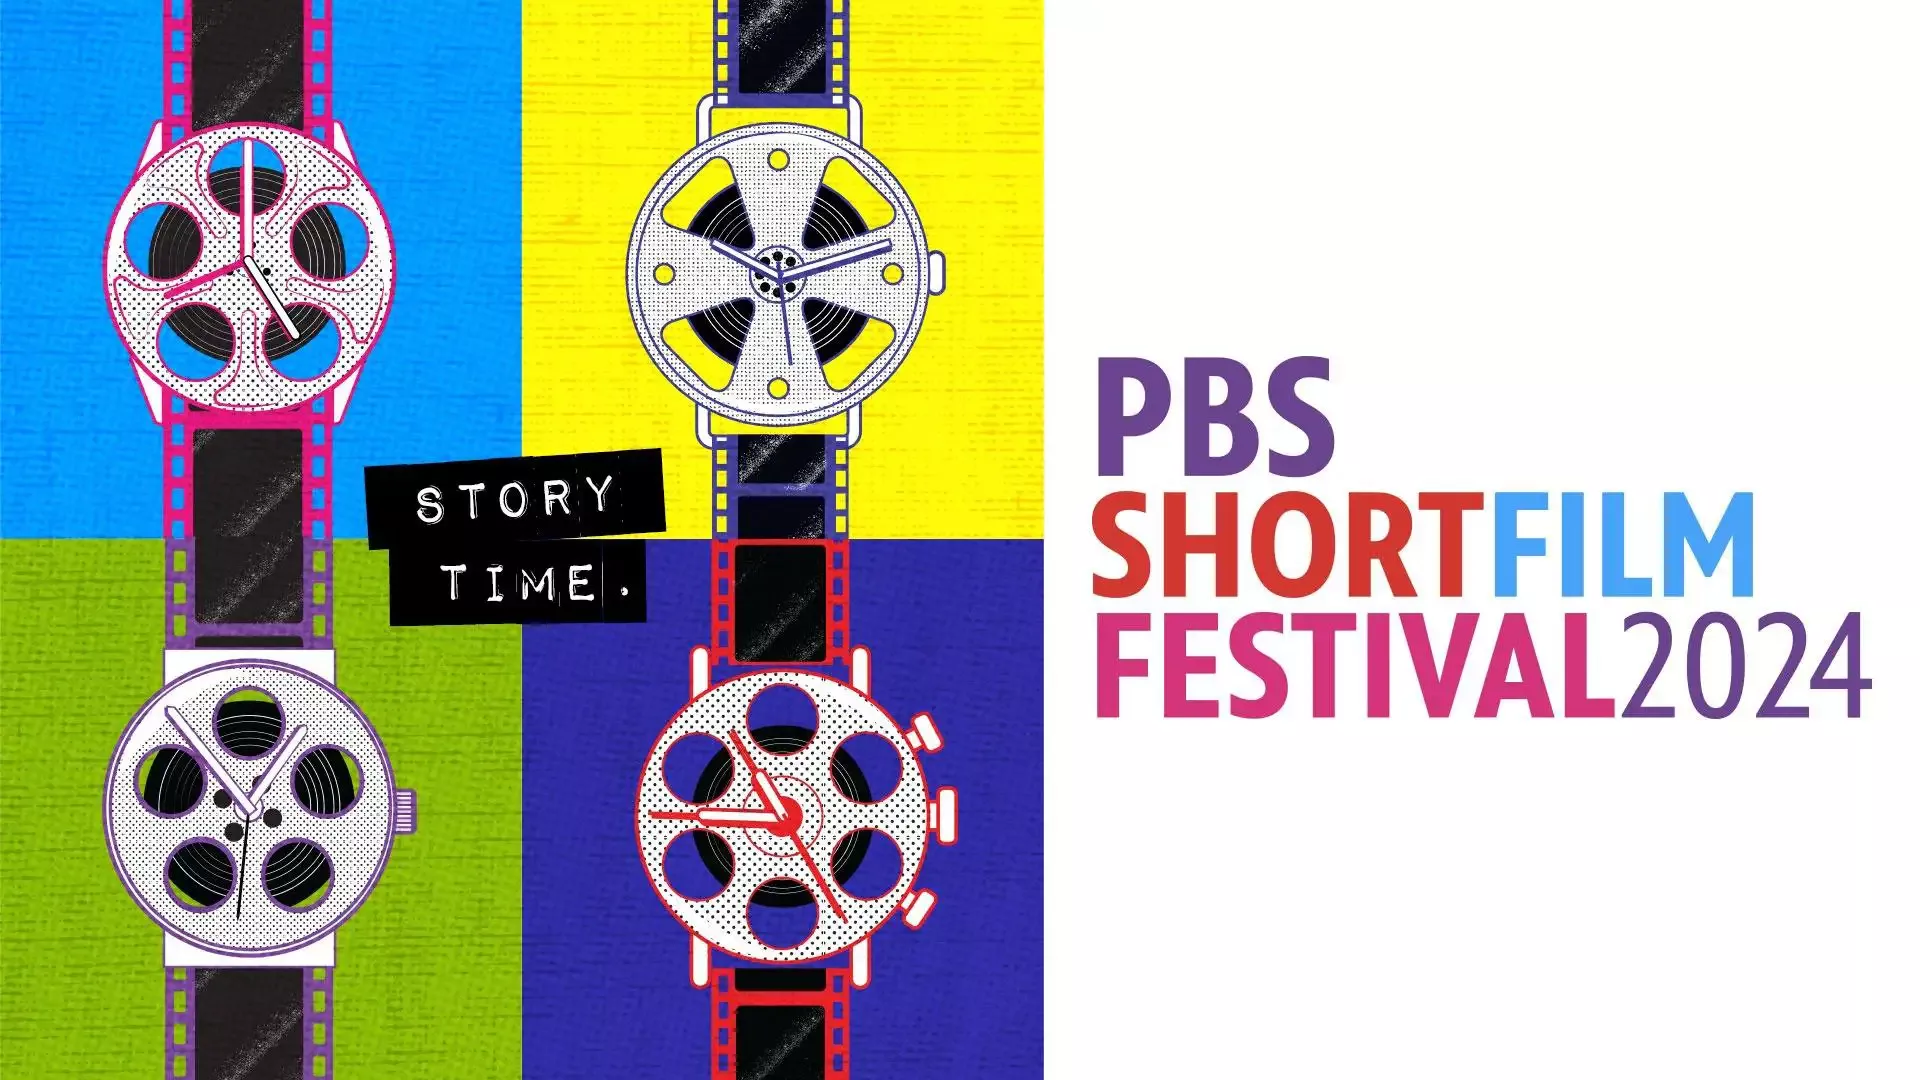 What to Know About the PBS Short Film Festival